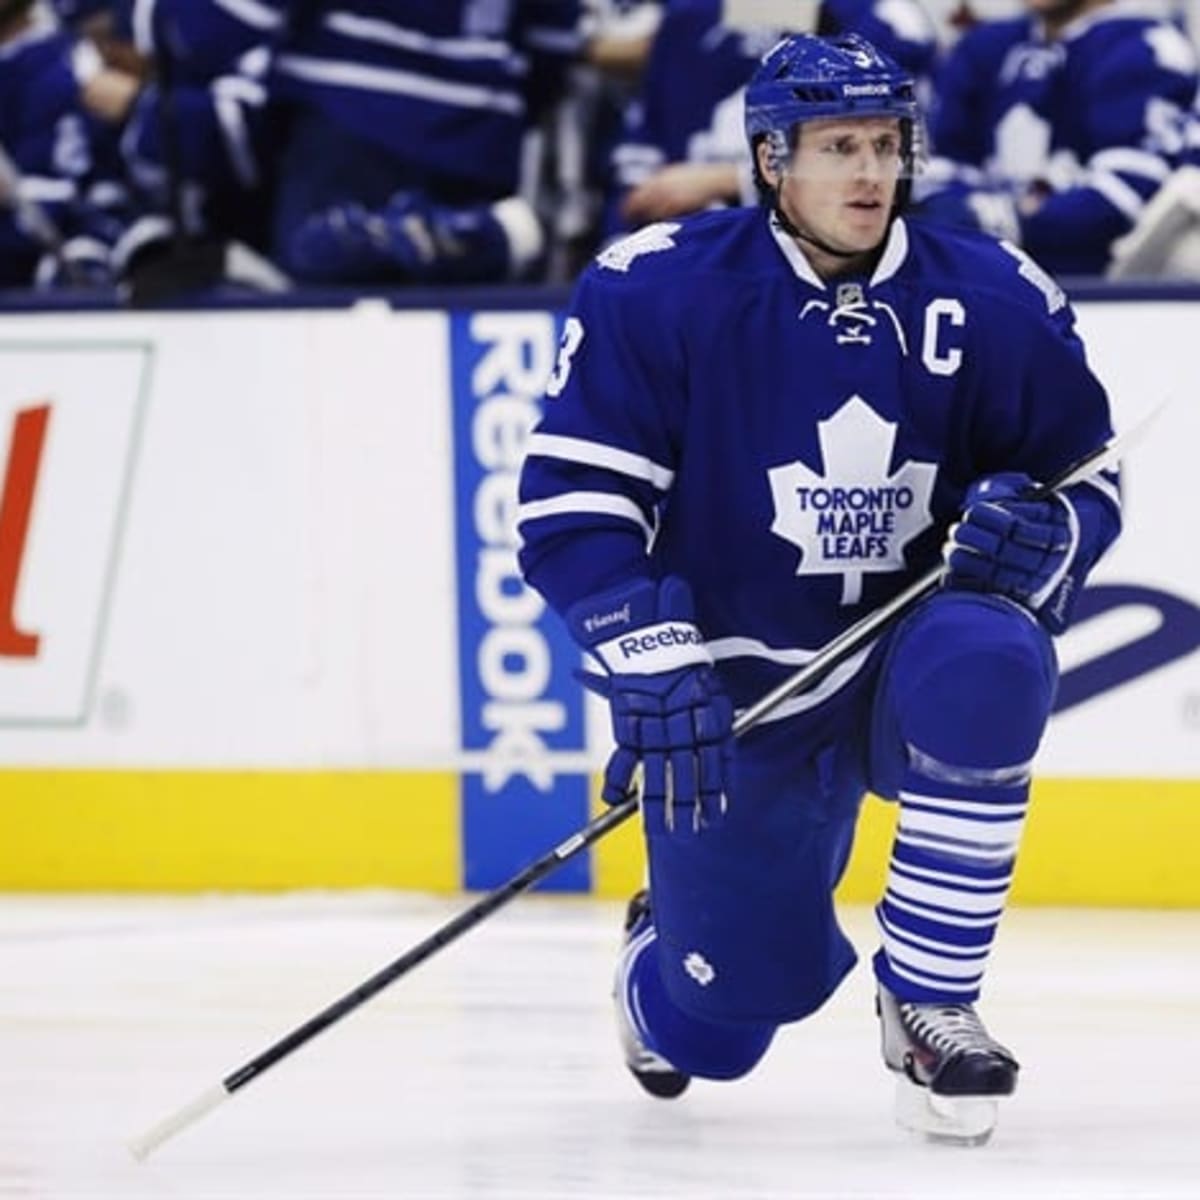 SIMMONS: Former Maple Leafs captain Dion Phaneuf officially retires,  'proud' of his career